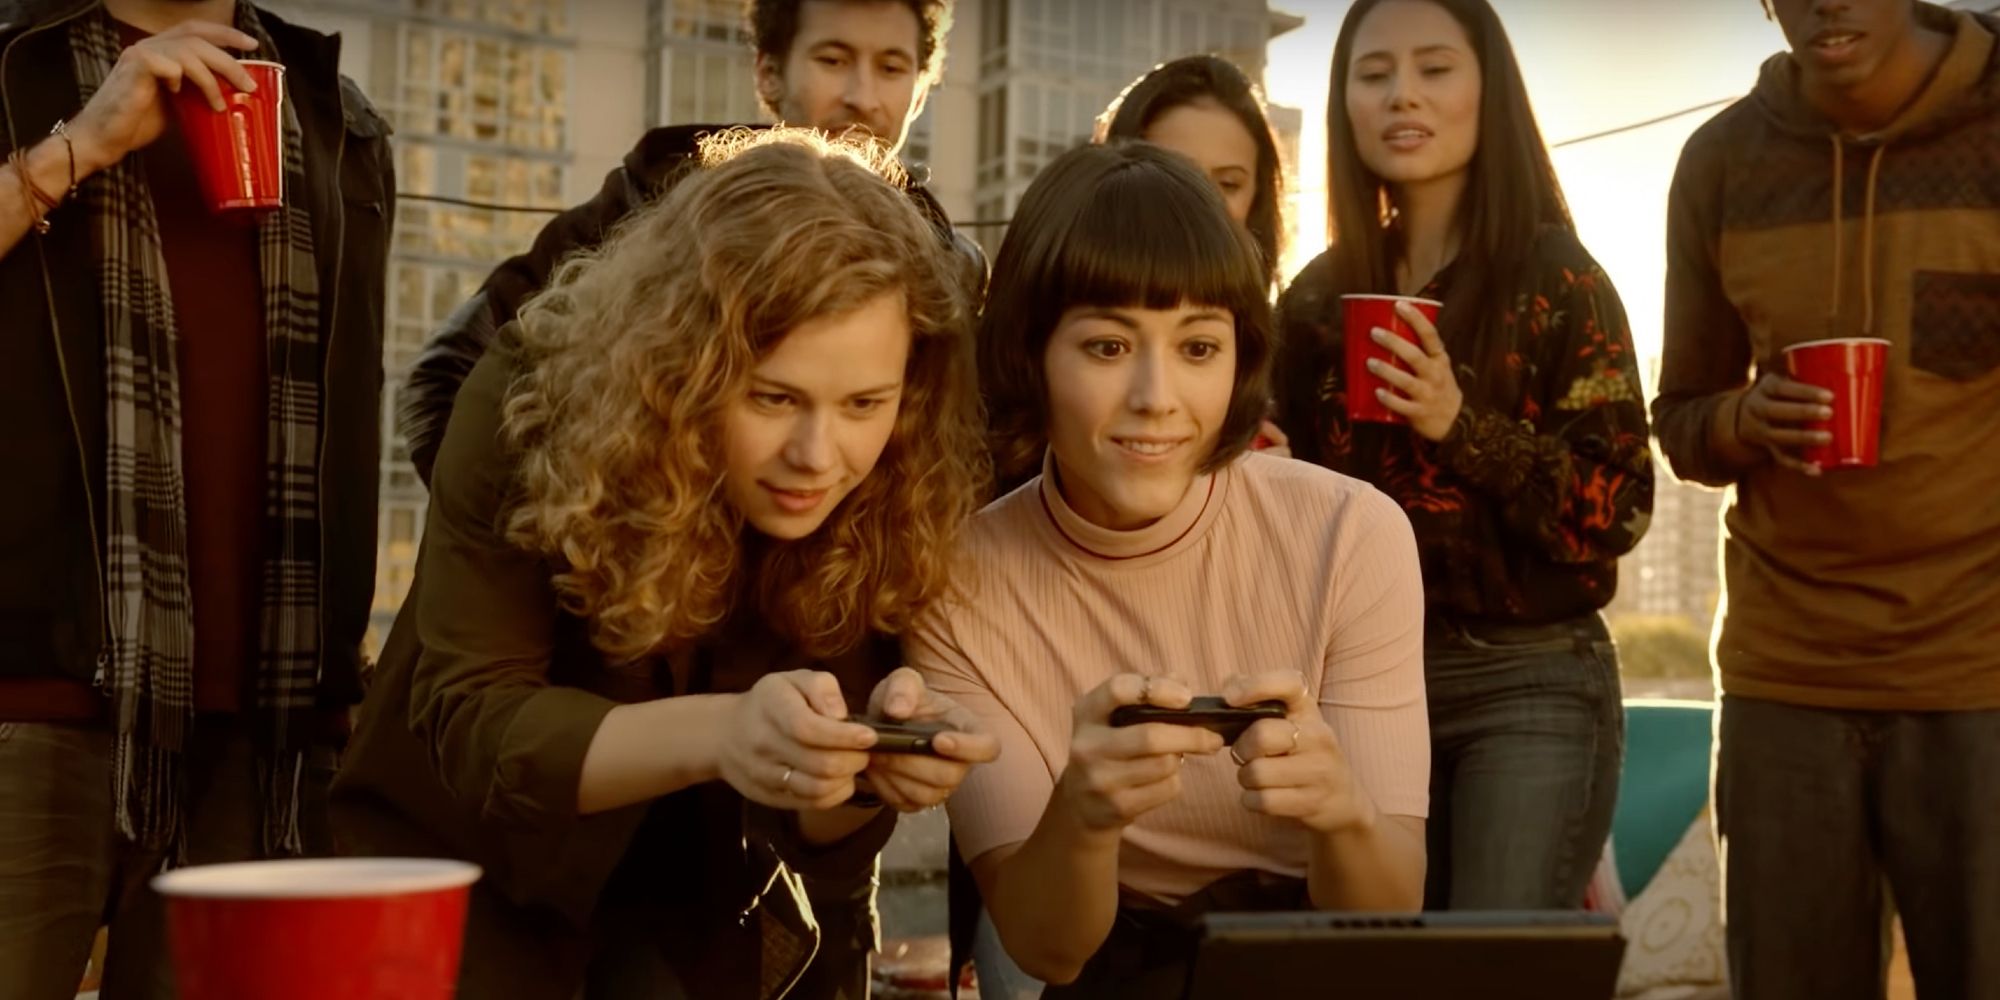 Nintendo Switch Ads Don't Get How People Play Games